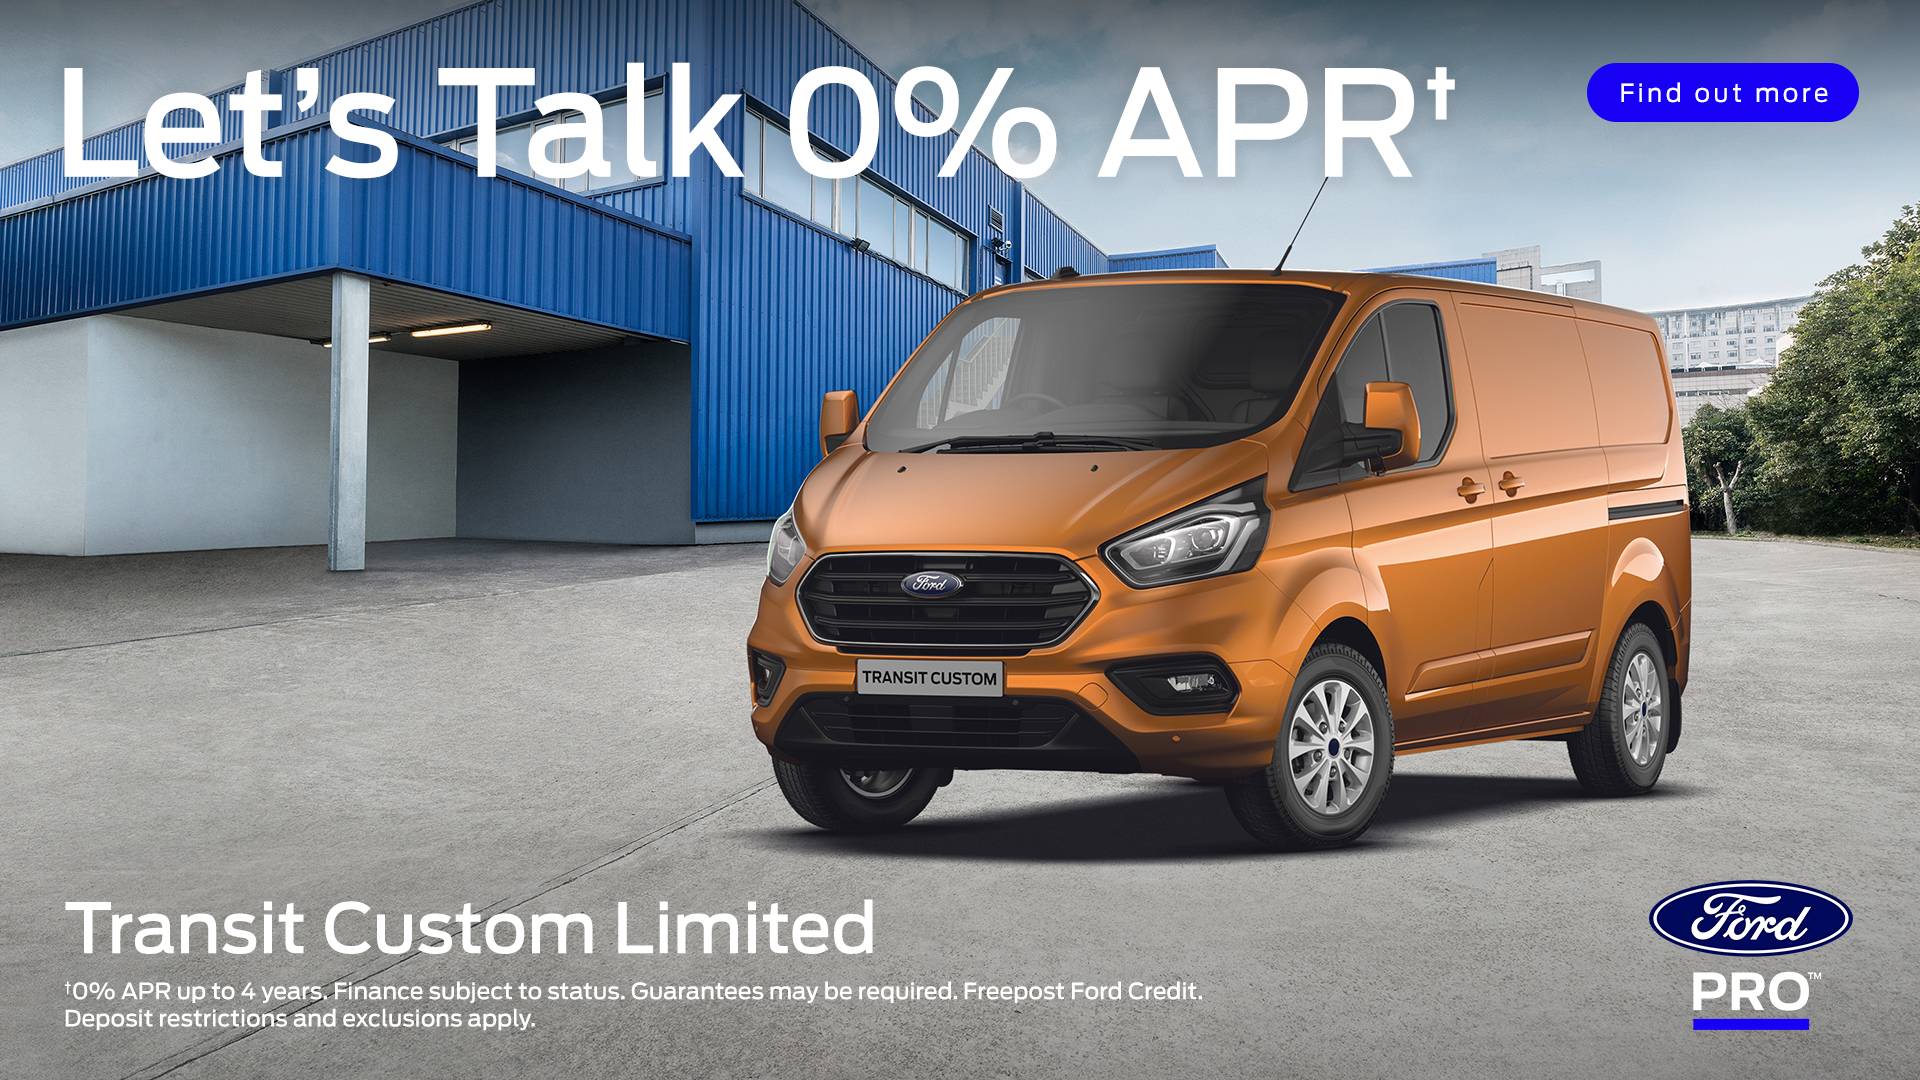 0% APR available on Ford Custom Limited